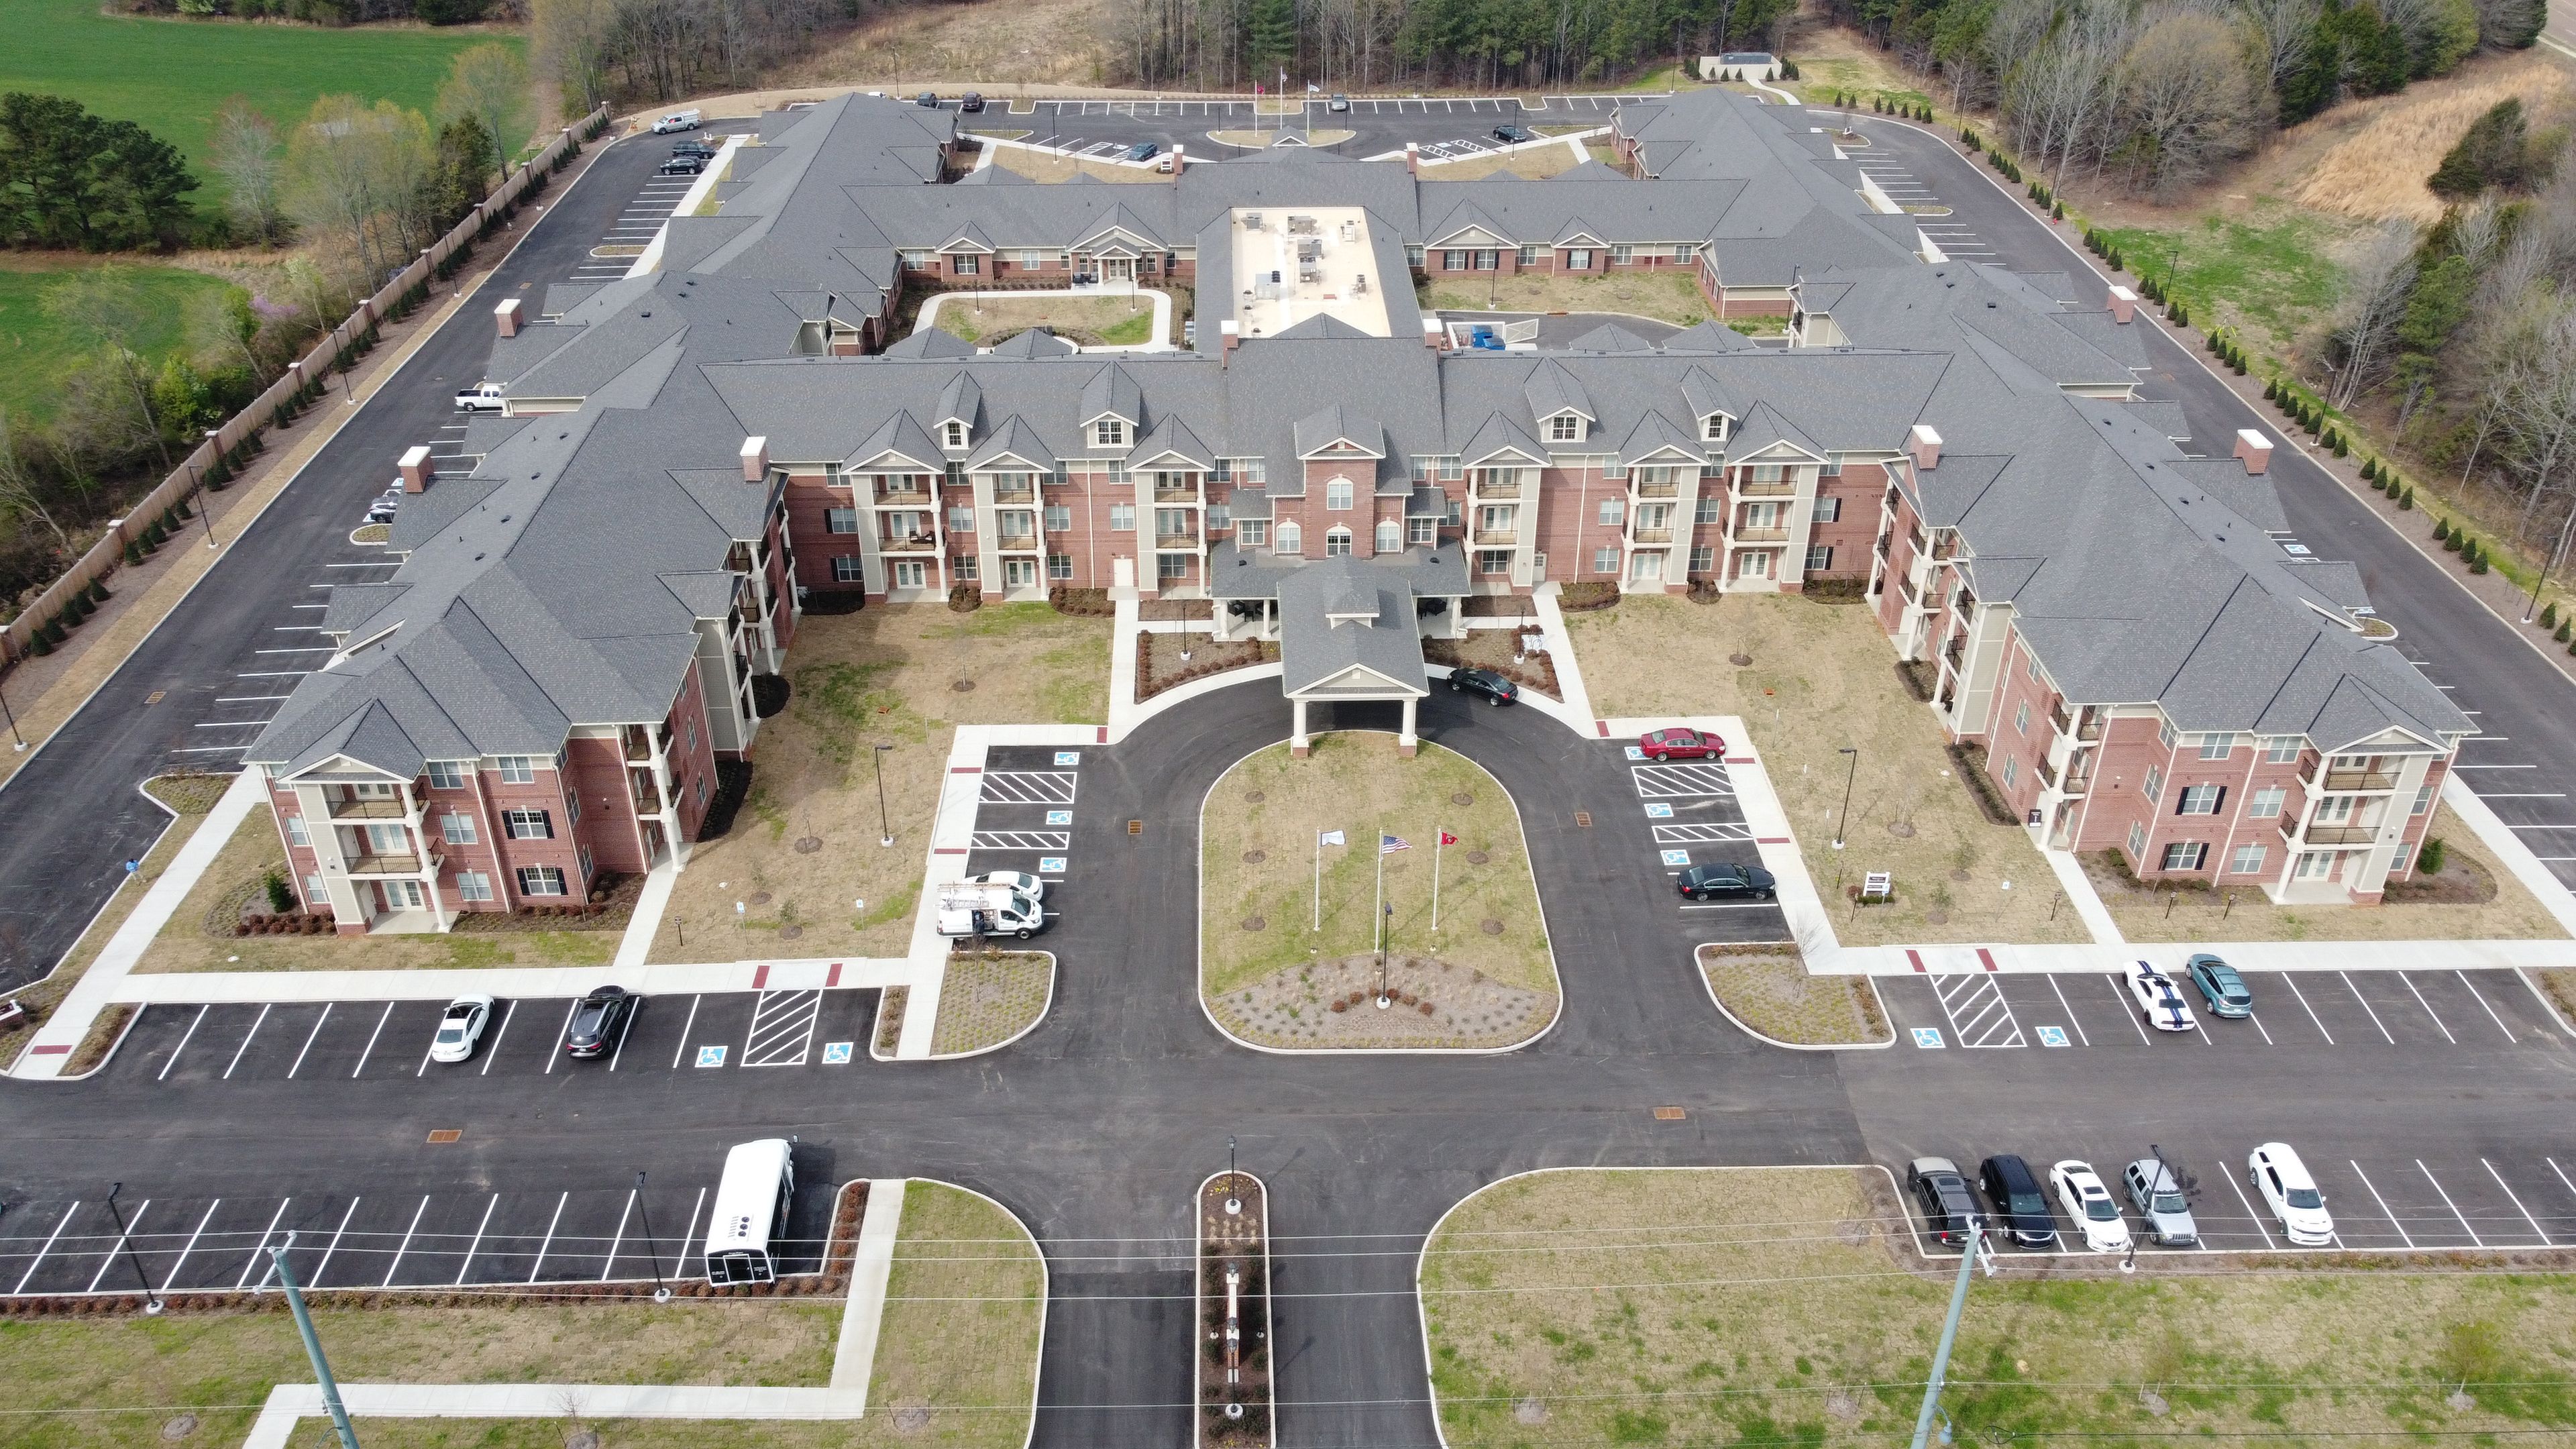 Aerial view of Storypoint Collierville senior living community with buildings, houses, and vehicles.